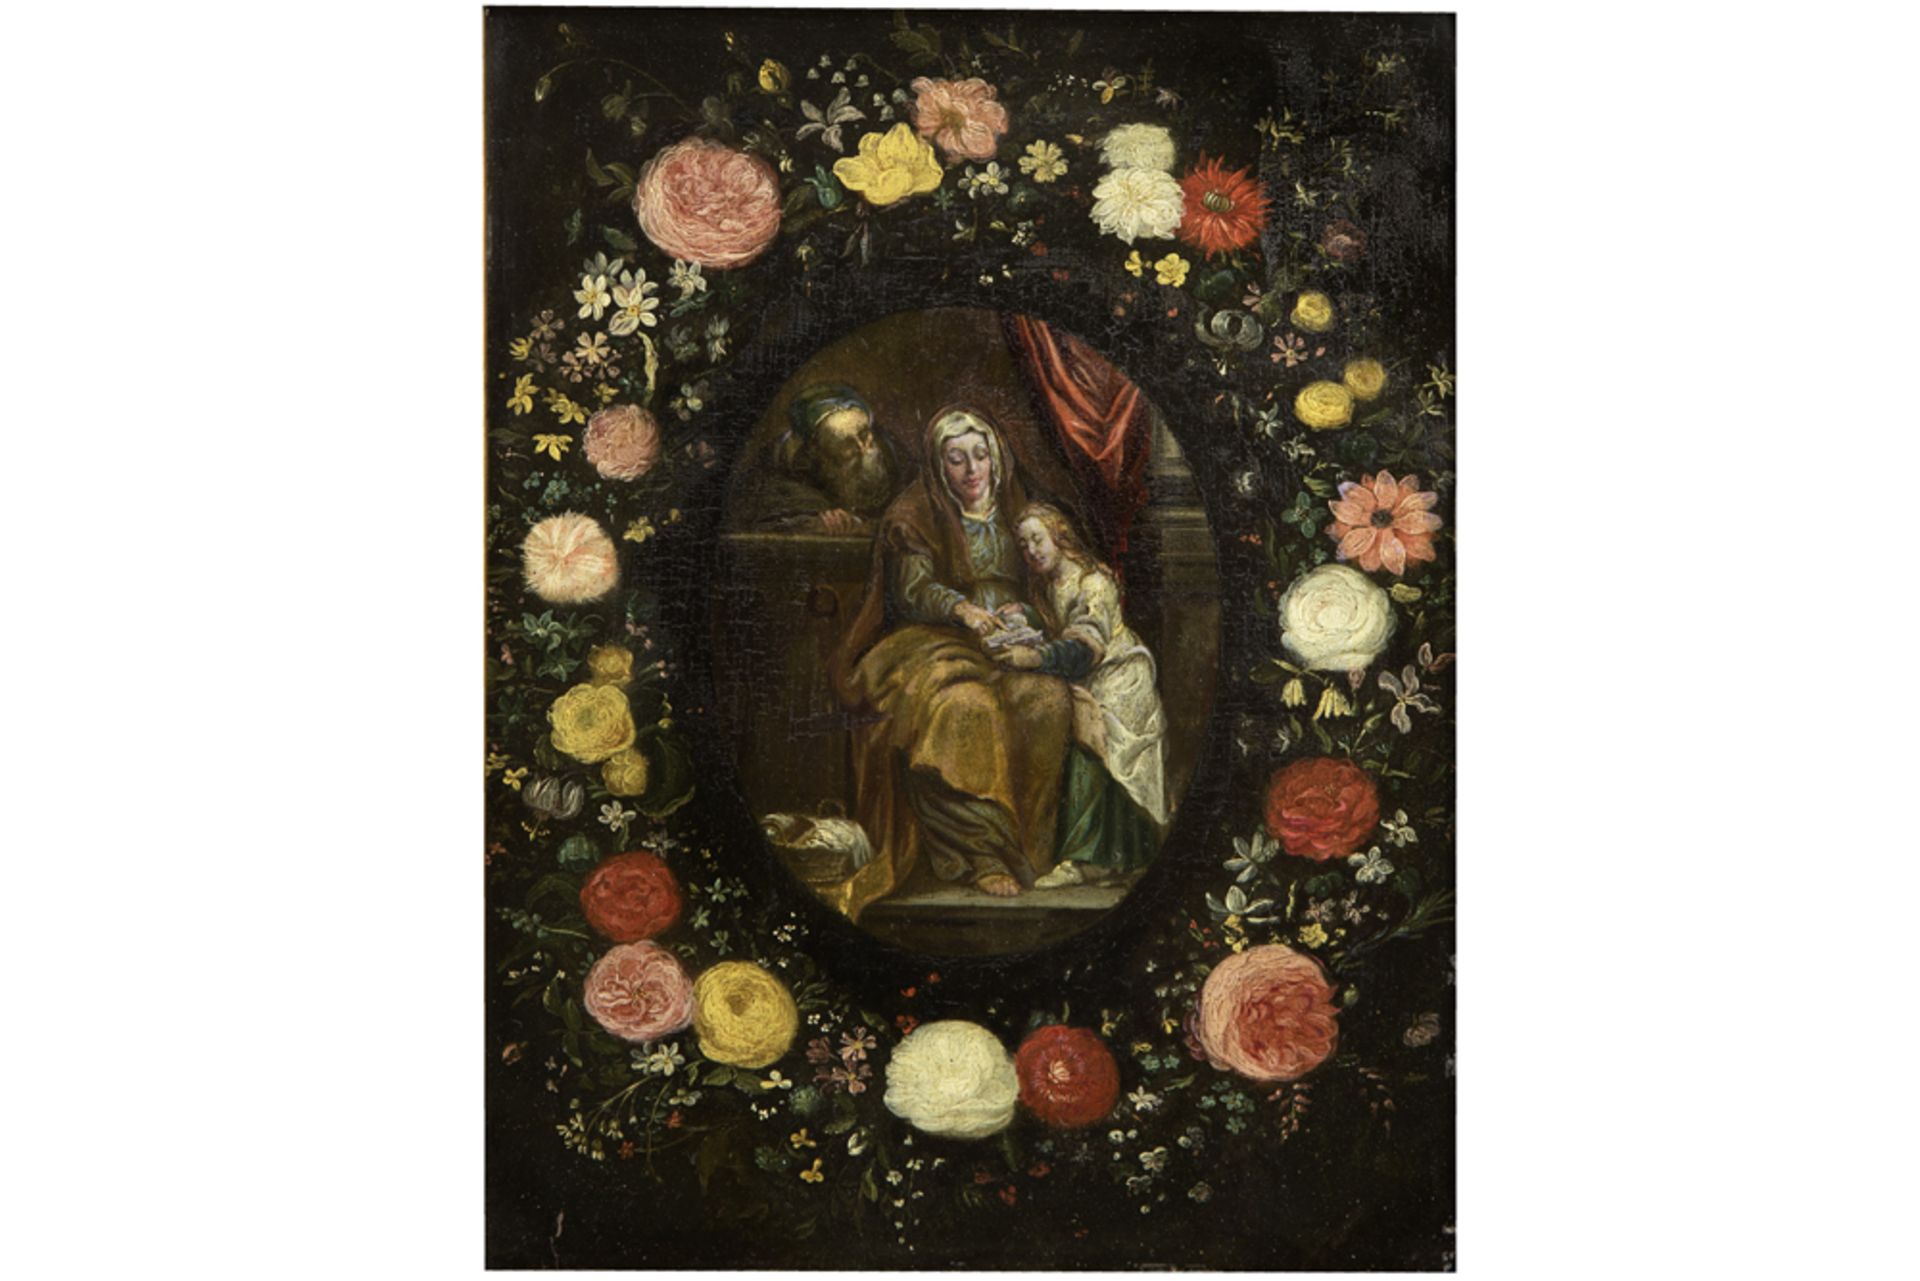 17th Cent. Flemish oil on copper in the style of/by a follower of Jan van Kessel and van Baelen ||